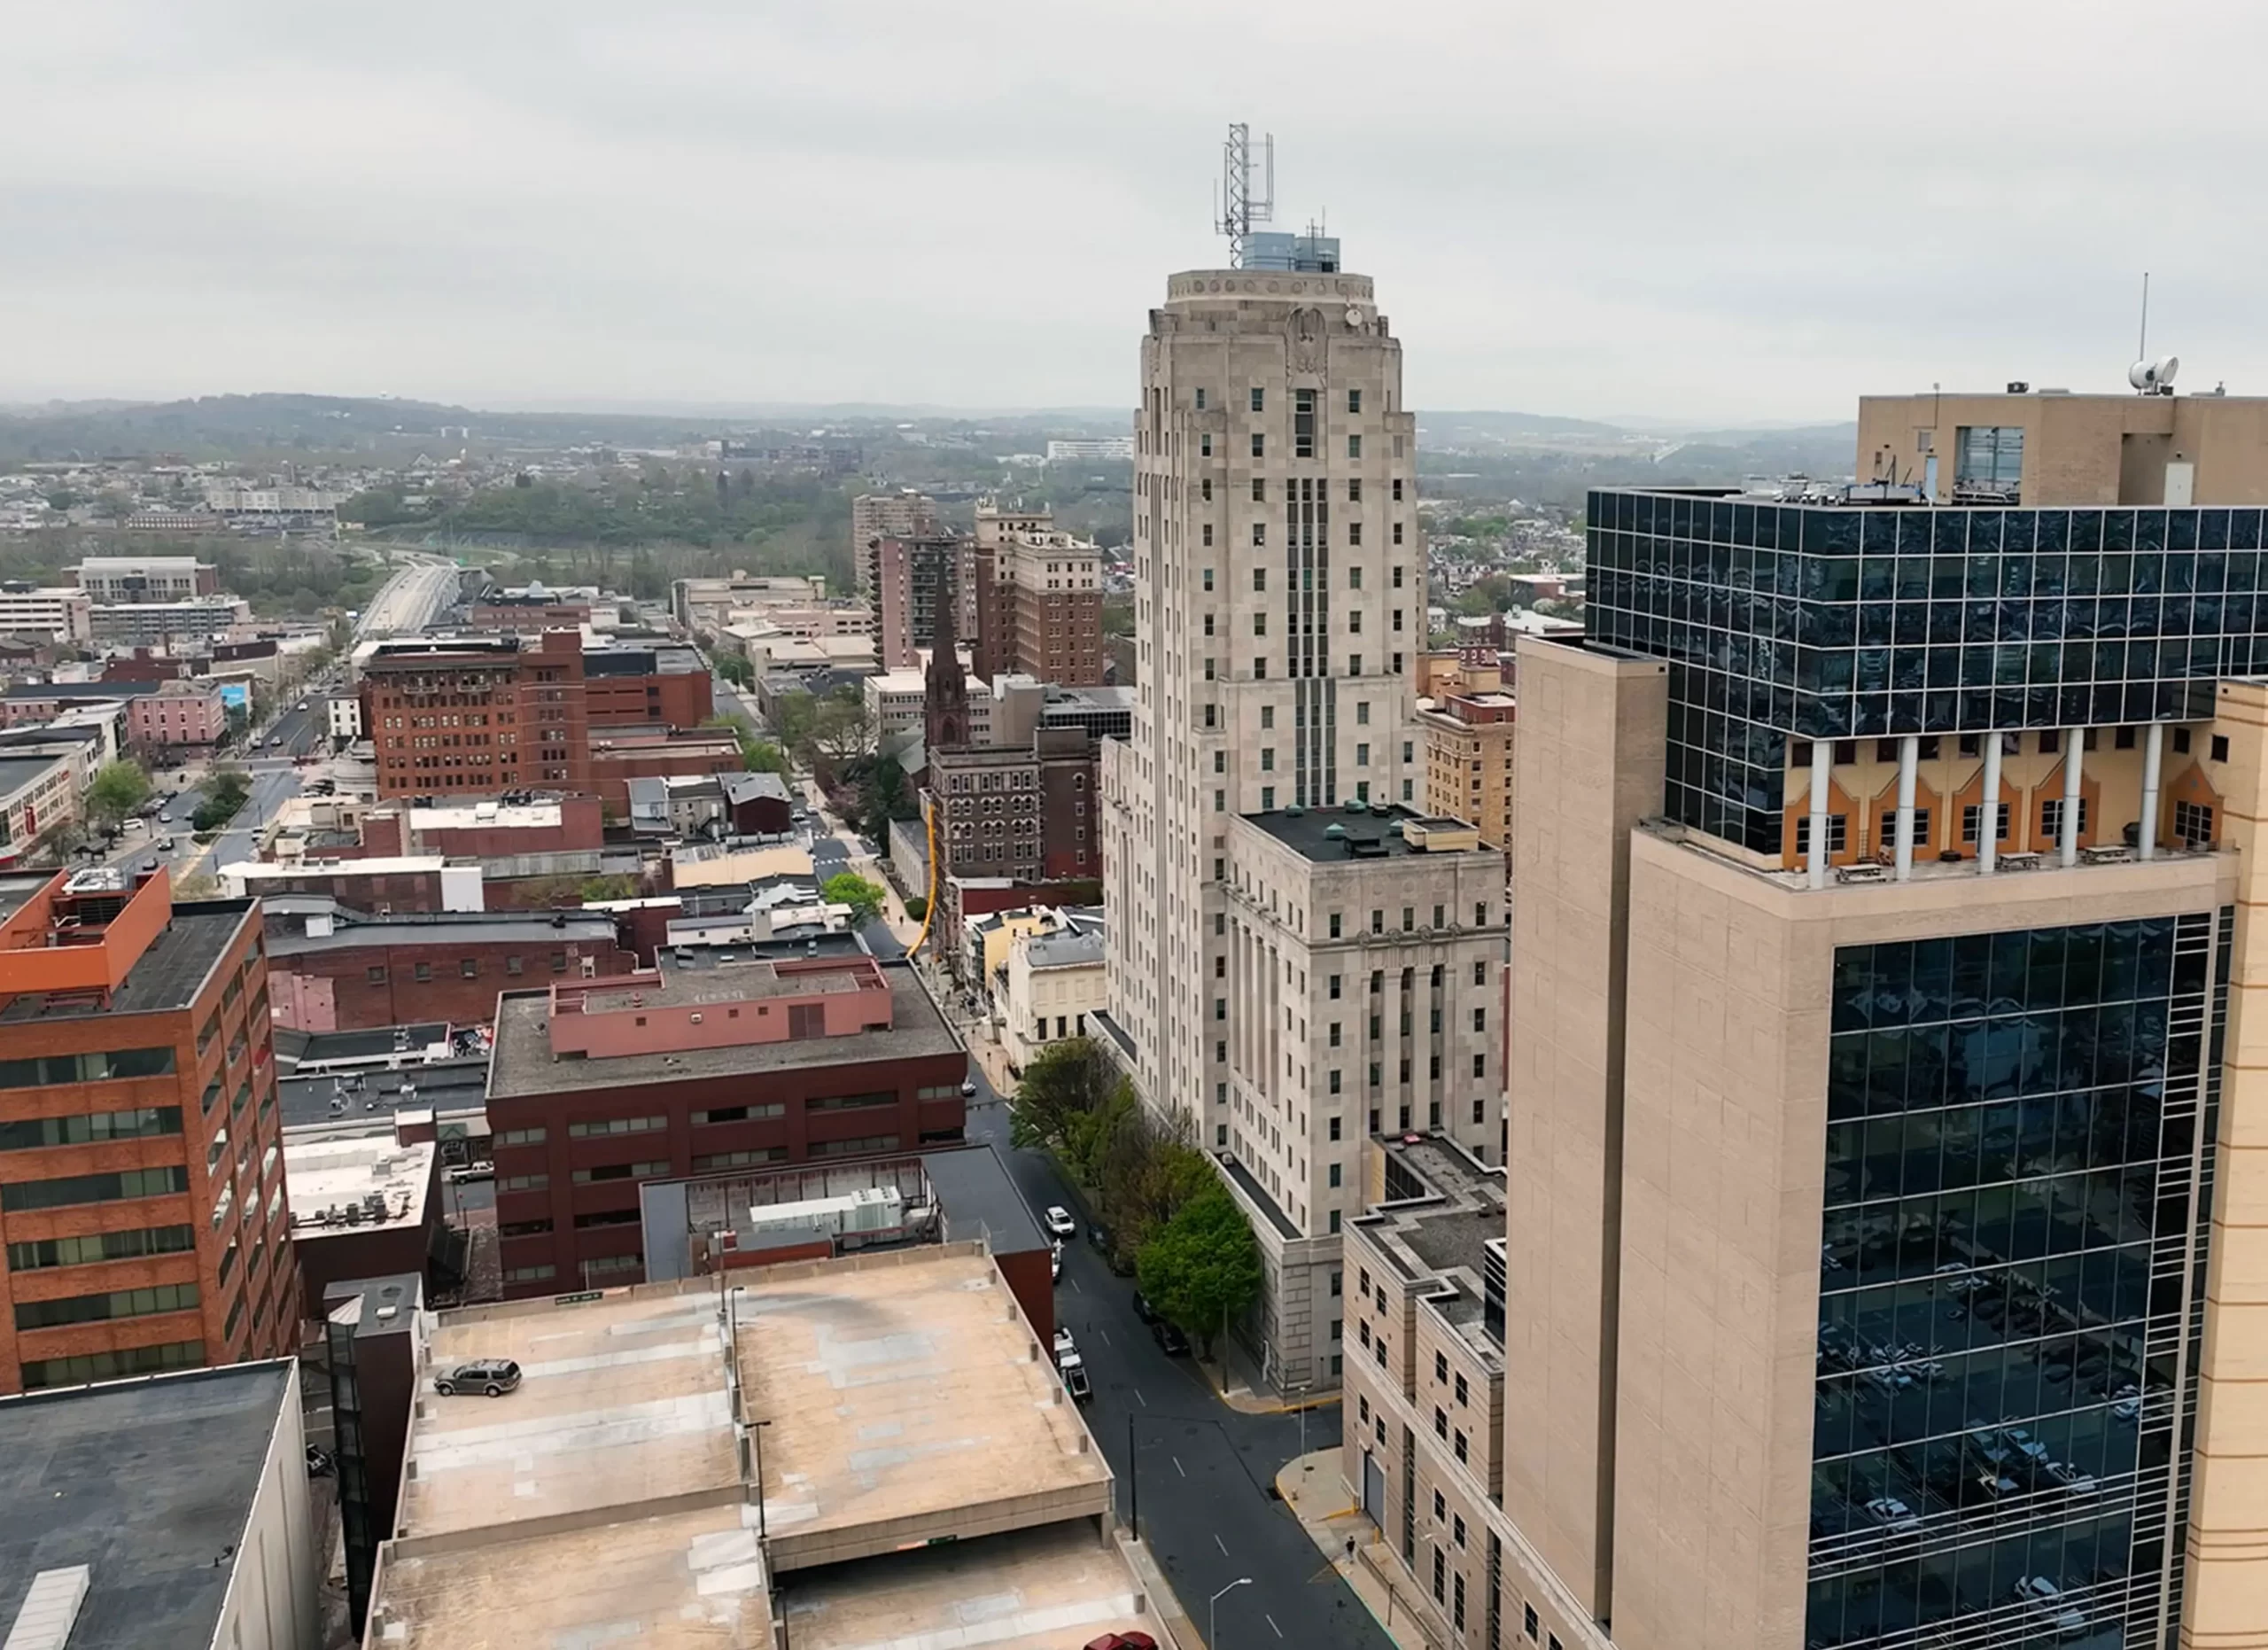 A photo of downtown Reading, PA with the courthouse at the center. The sky is overcast in the background.